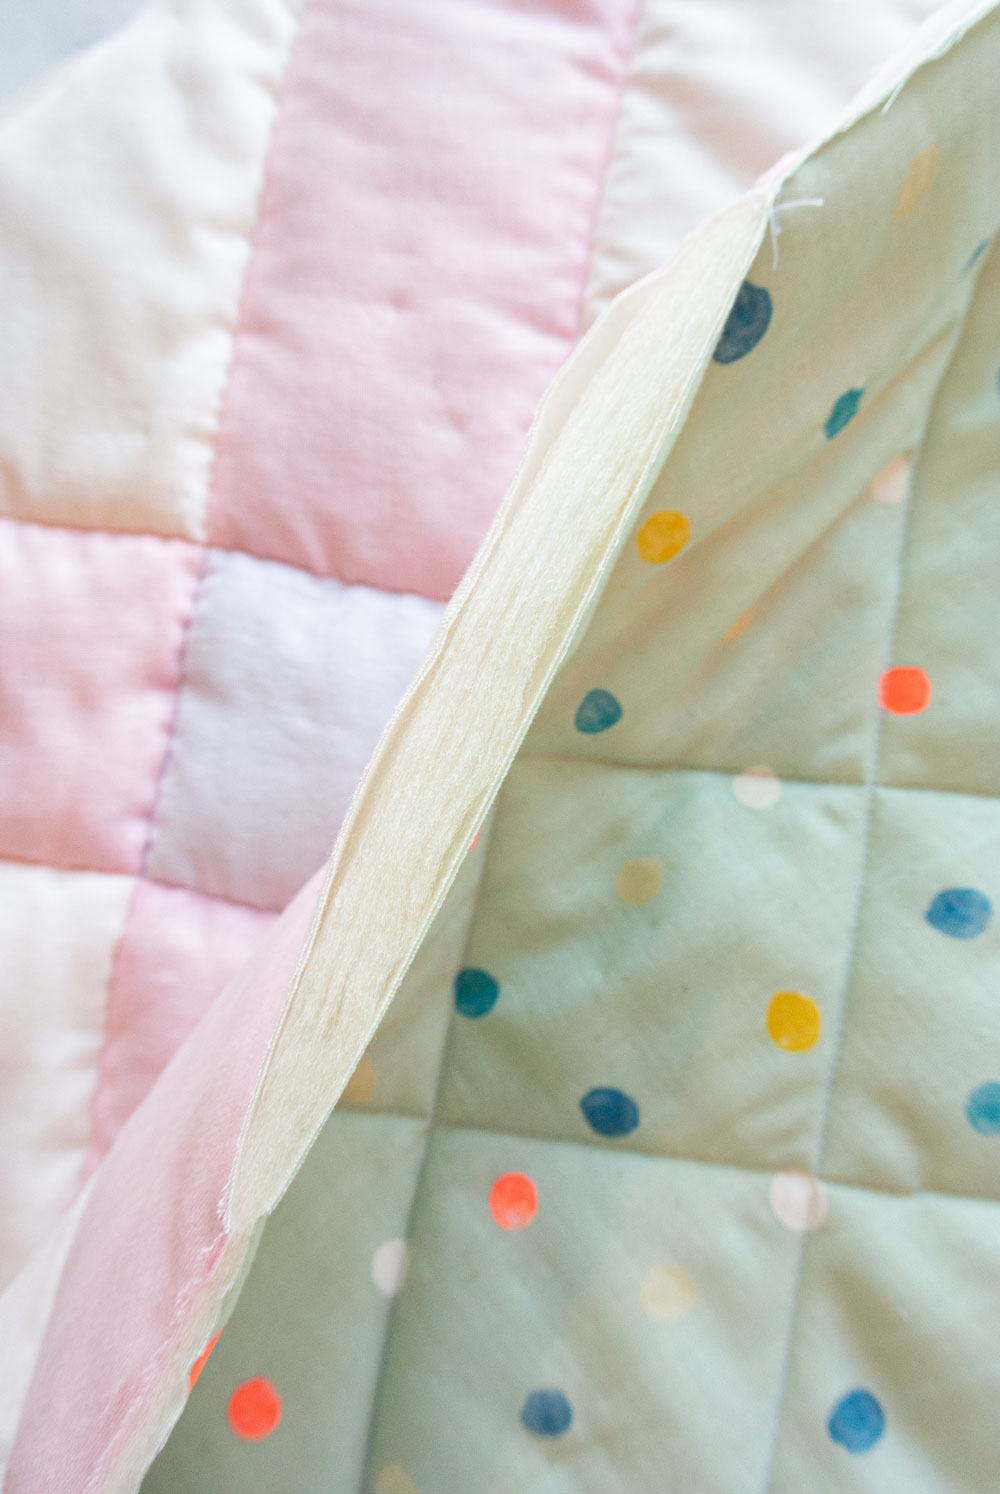 How to make the softest baby quilt in the world! The answer is to quilt with double gauze and wool batting – a sewing tutorial on how to do both! suzyquilts.com #modernquiltpattern #quiltingtutorial